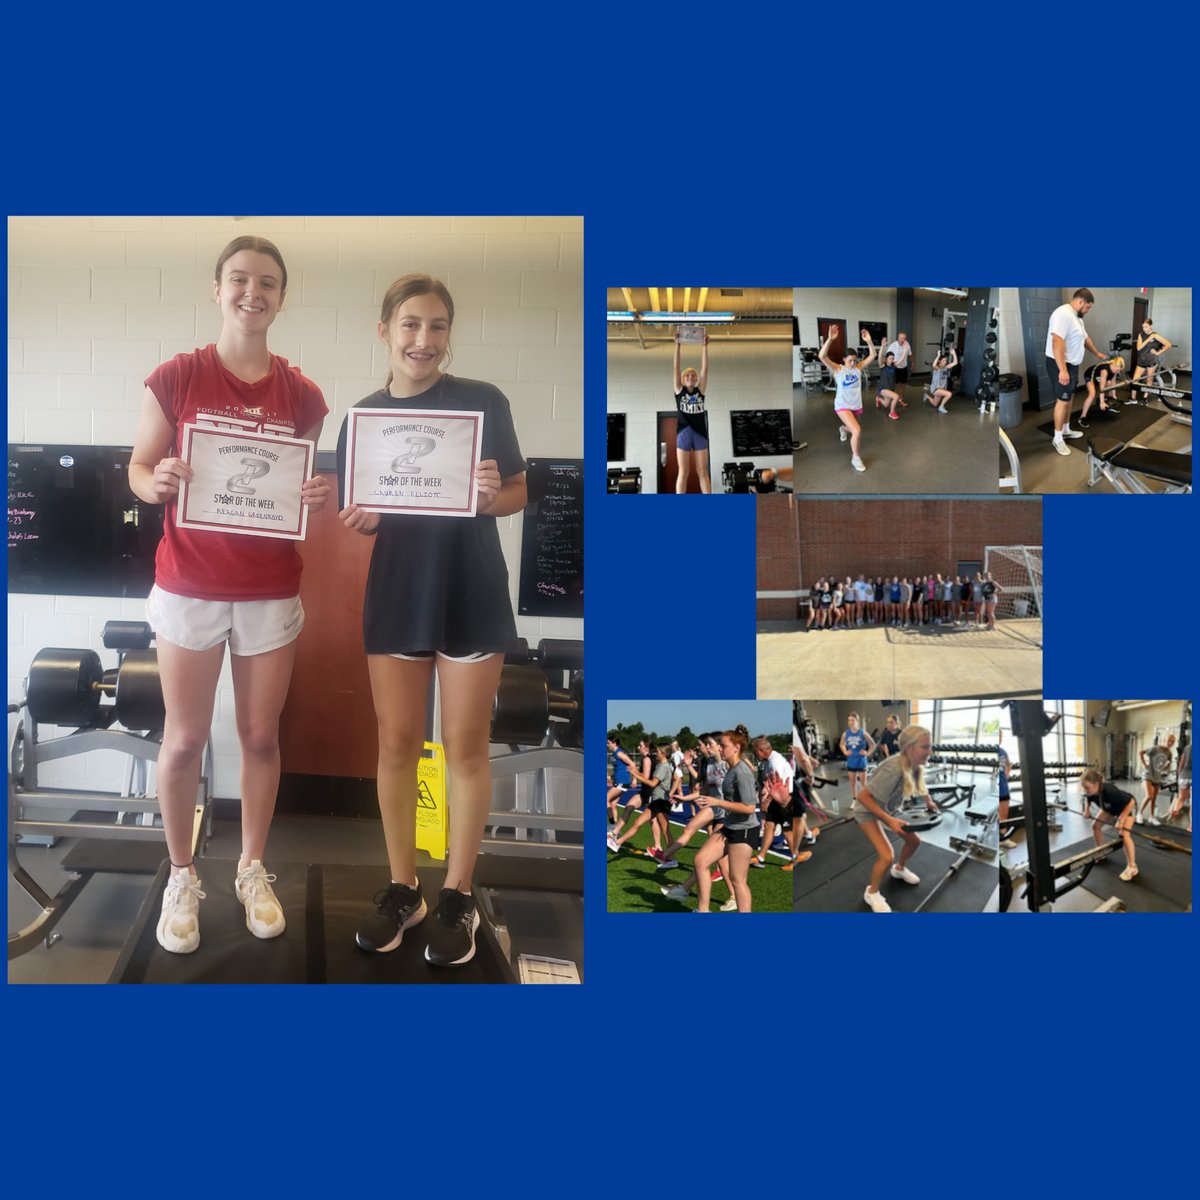 BIG week 2 for the Ladies of @racerathletes ! The improvement in only 6 days has been above and beyond! WE look forward to the next 4 weeks with this group. Consistent REAL TRAINING will always payoff! HUUUGEE HOLLER OUT to Reagan and Lauren are Stars of the Week! #pcWErONE